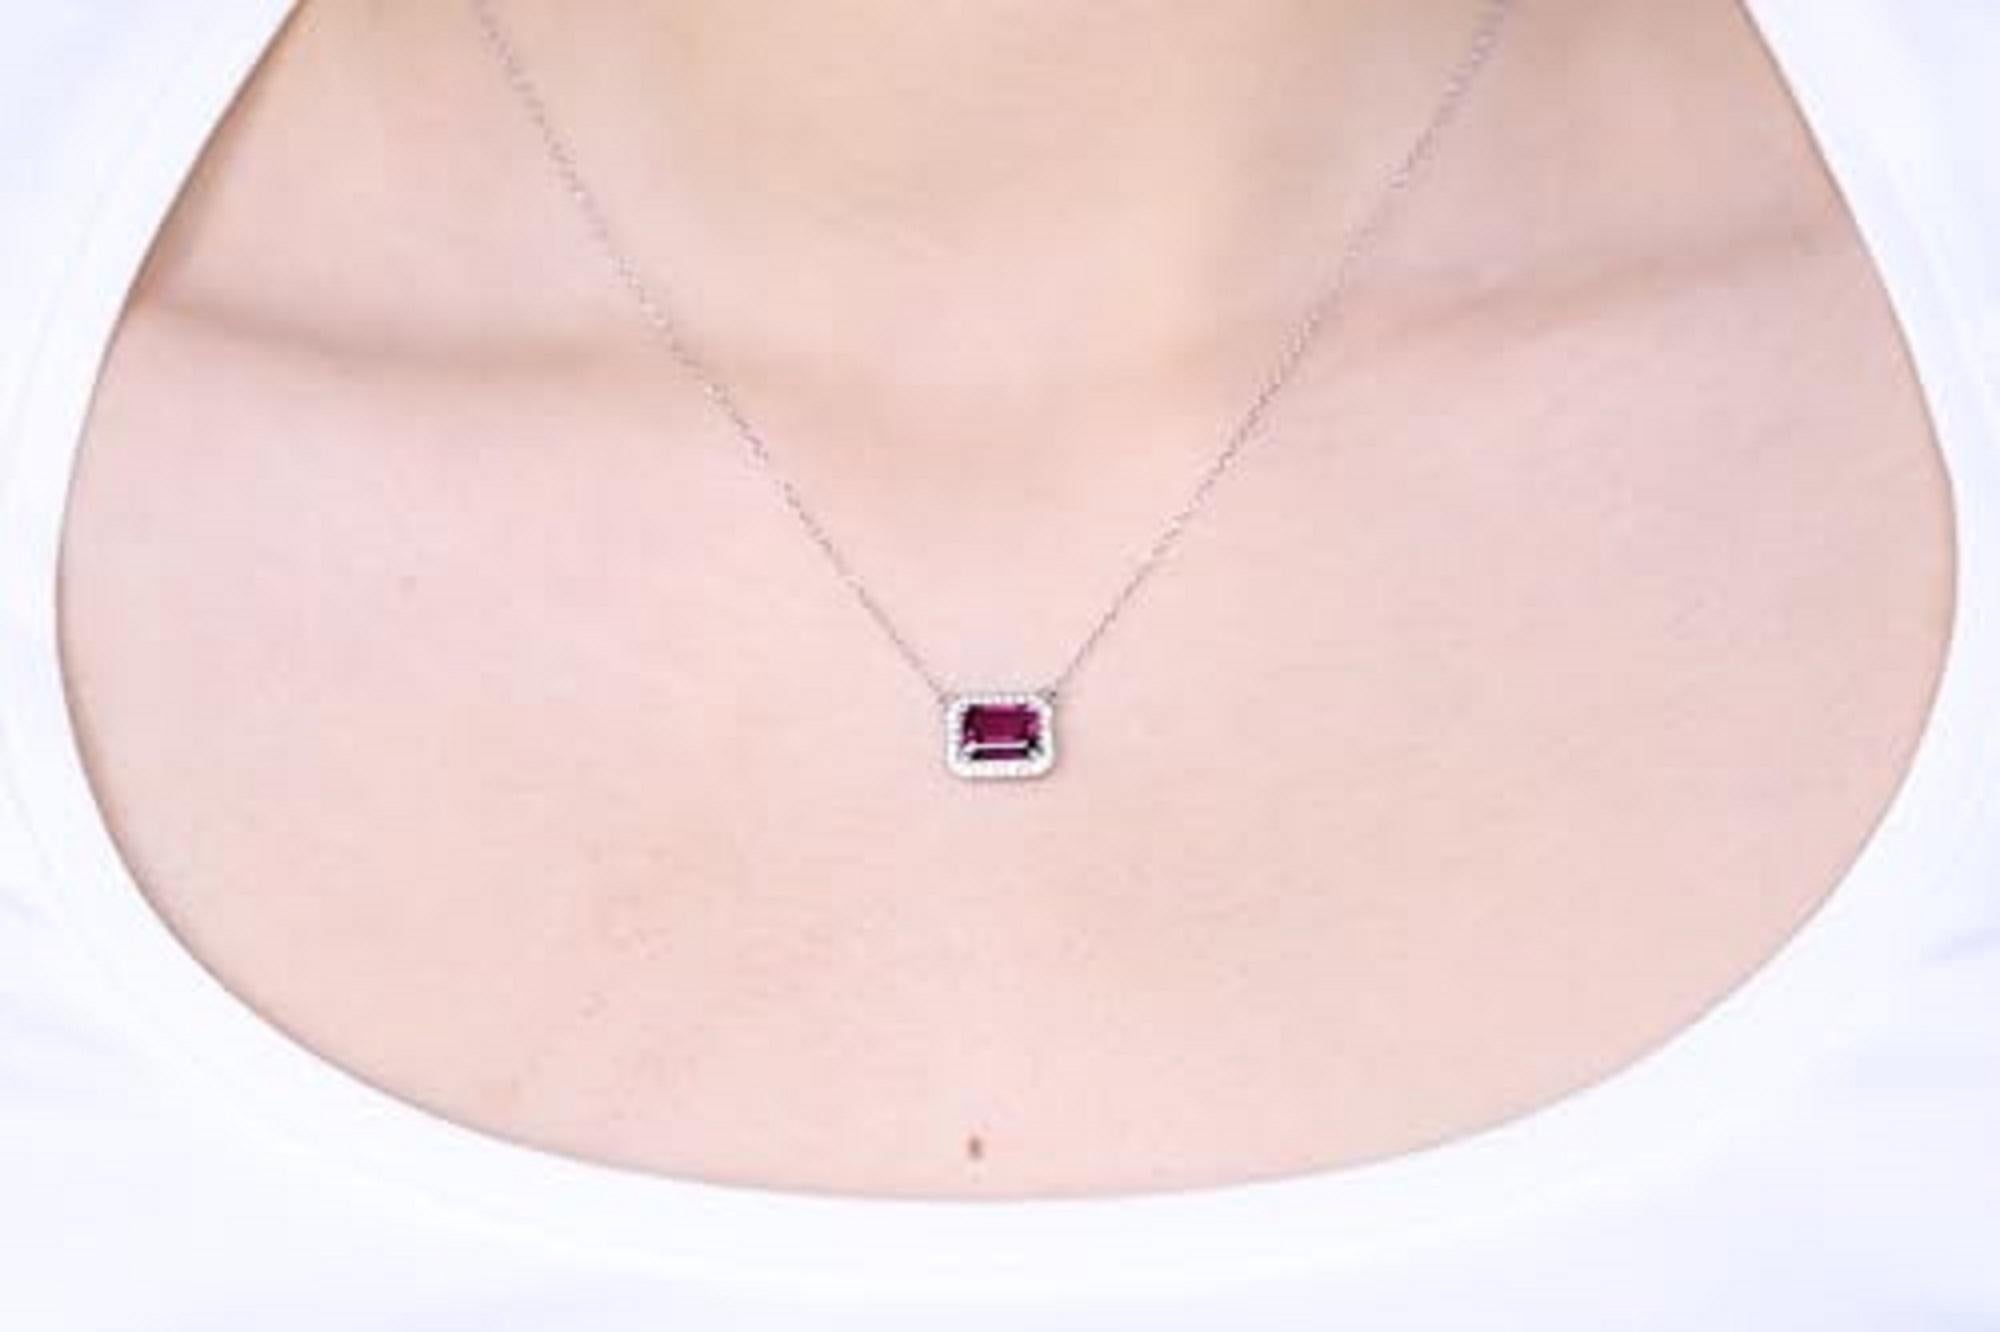 Decorate yourself in elegance with this Pendant is crafted from 14-karat White Gold by Gin & Grace. This Pendant is made up of 8x6 mm Emerald-Cut (1 pcs) 2.0 carat Rodolite and Round-cut White Diamond (28 Pcs) 0.14 Carat. This Pendant is weight 1.71